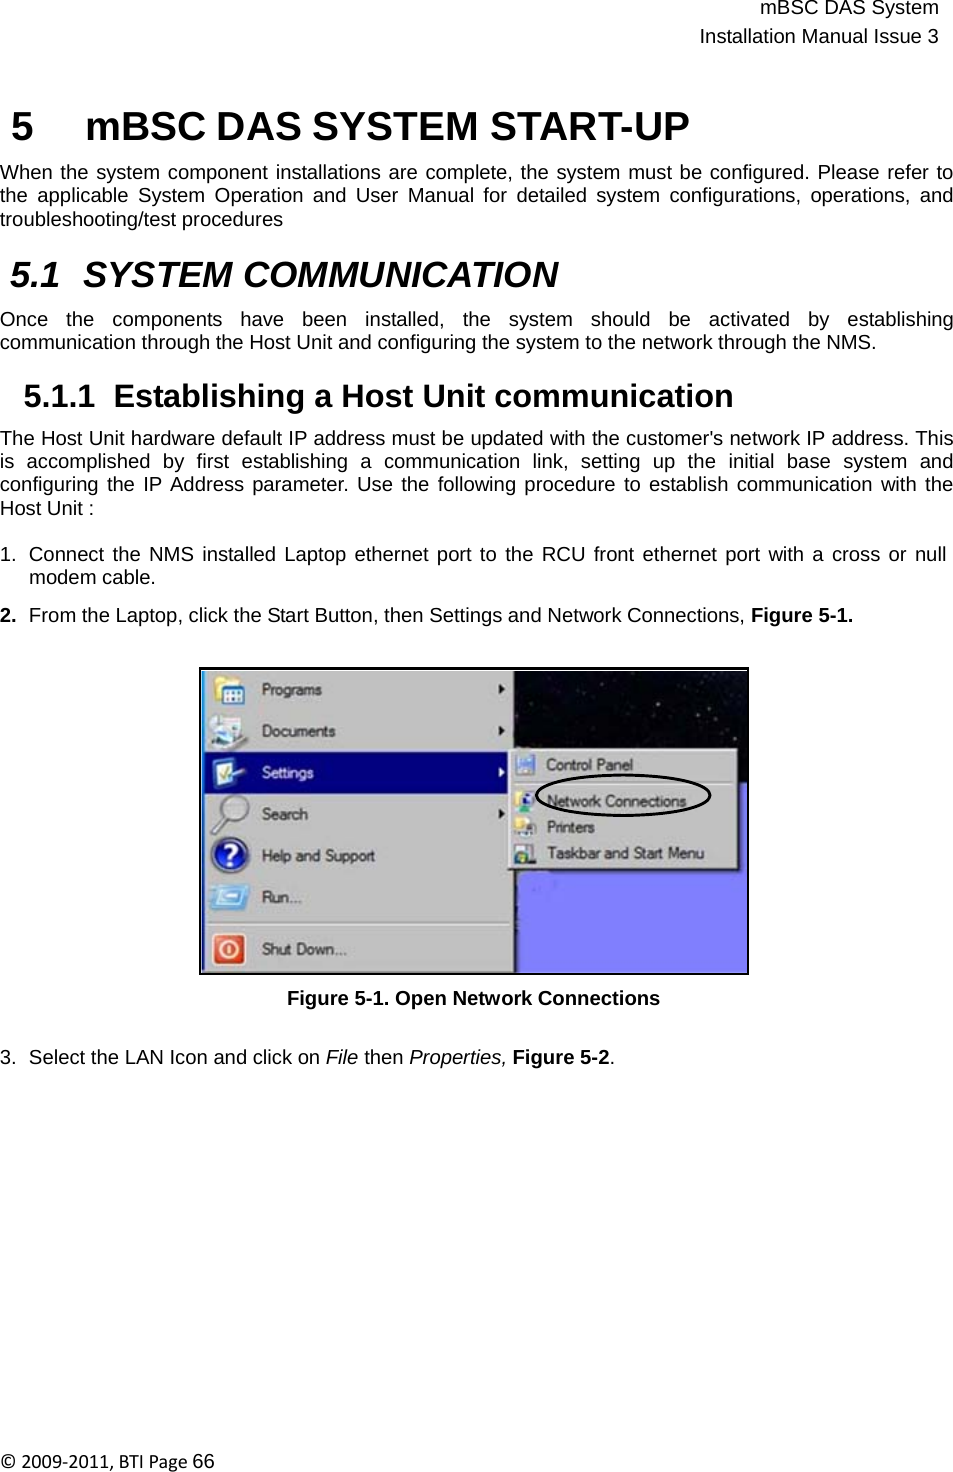 mBSC DAS SystemInstallation Manual Issue 3©2009‐2011,BTIPage66   5 mBSC DAS SYSTEM START-UP  When the system component installations are complete, the system must be configured. Please refer to the applicable System Operation and User Manual for detailed system configurations, operations, and troubleshooting/test procedures  5.1 SYSTEM COMMUNICATION  Once   the   components   have   been   installed,   the   system   should   be   activated   by   establishing communication through the Host Unit and configuring the system to the network through the NMS.  5.1.1  Establishing a Host Unit communication  The Host Unit hardware default IP address must be updated with the customer&apos;s network IP address. This is  accomplished  by  first  establishing  a  communication  link,  setting  up  the  initial  base  system  and configuring the IP Address parameter. Use the following procedure to establish communication with the Host Unit :  1.  Connect the NMS installed Laptop ethernet port to the RCU front ethernet port with a cross or null modem cable.  2.  From the Laptop, click the Start Button, then Settings and Network Connections, Figure 5-1.                   Figure 5-1. Open Network Connections   3.  Select the LAN Icon and click on File then Properties, Figure 5-2. 